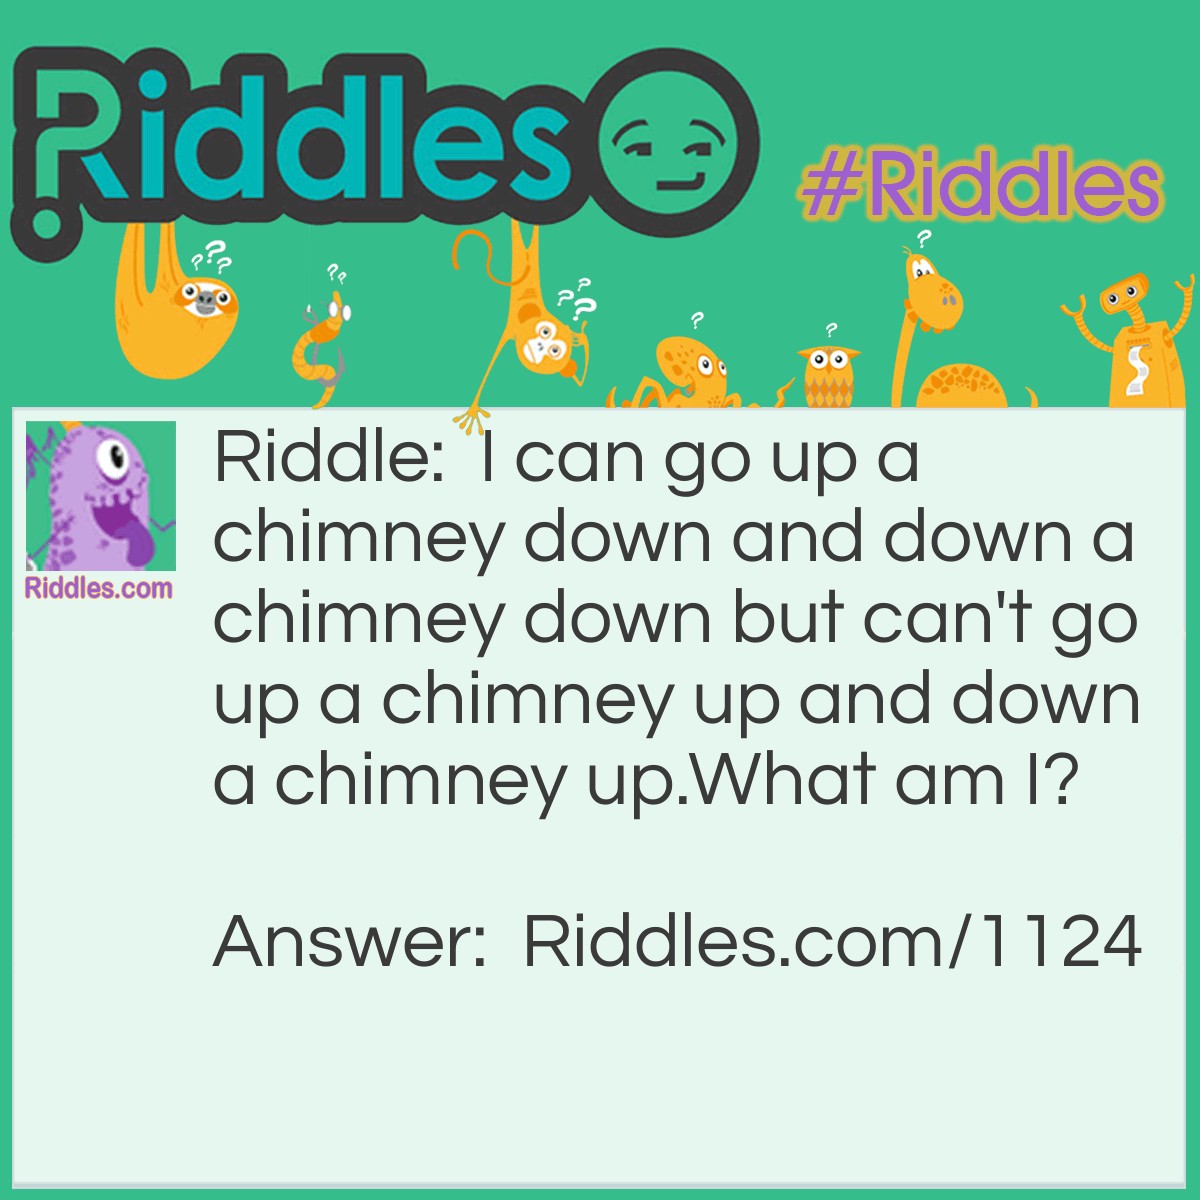 Riddle: I can go up a chimney down and down a chimney down but can't go up a chimney up and down a chimney up.
What am I? Answer: an umbrella